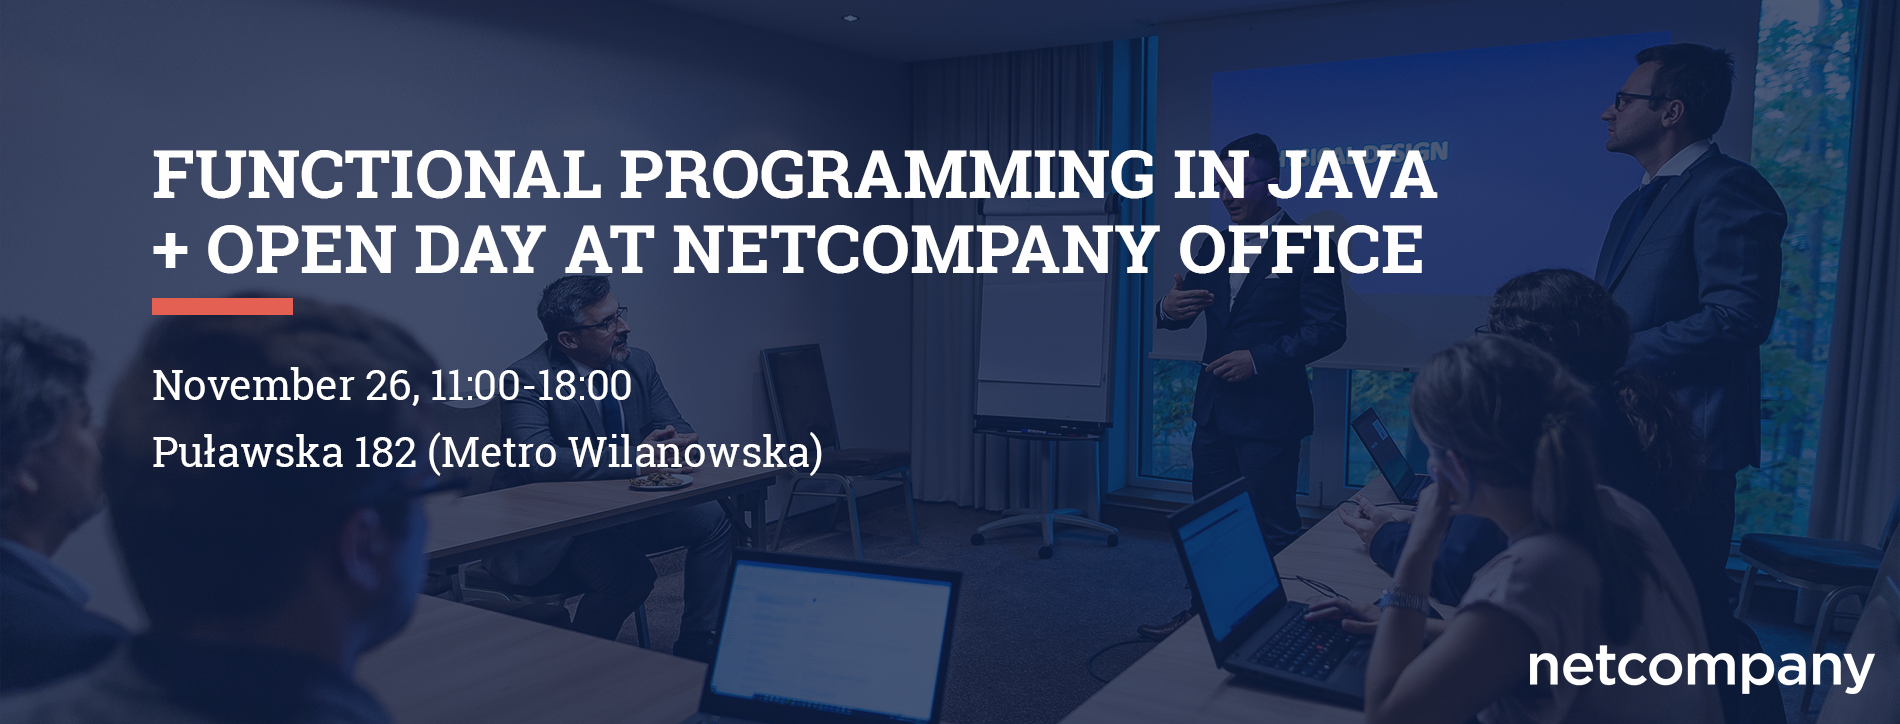 functional-programming-in-java-open-day-at-netcompany-office